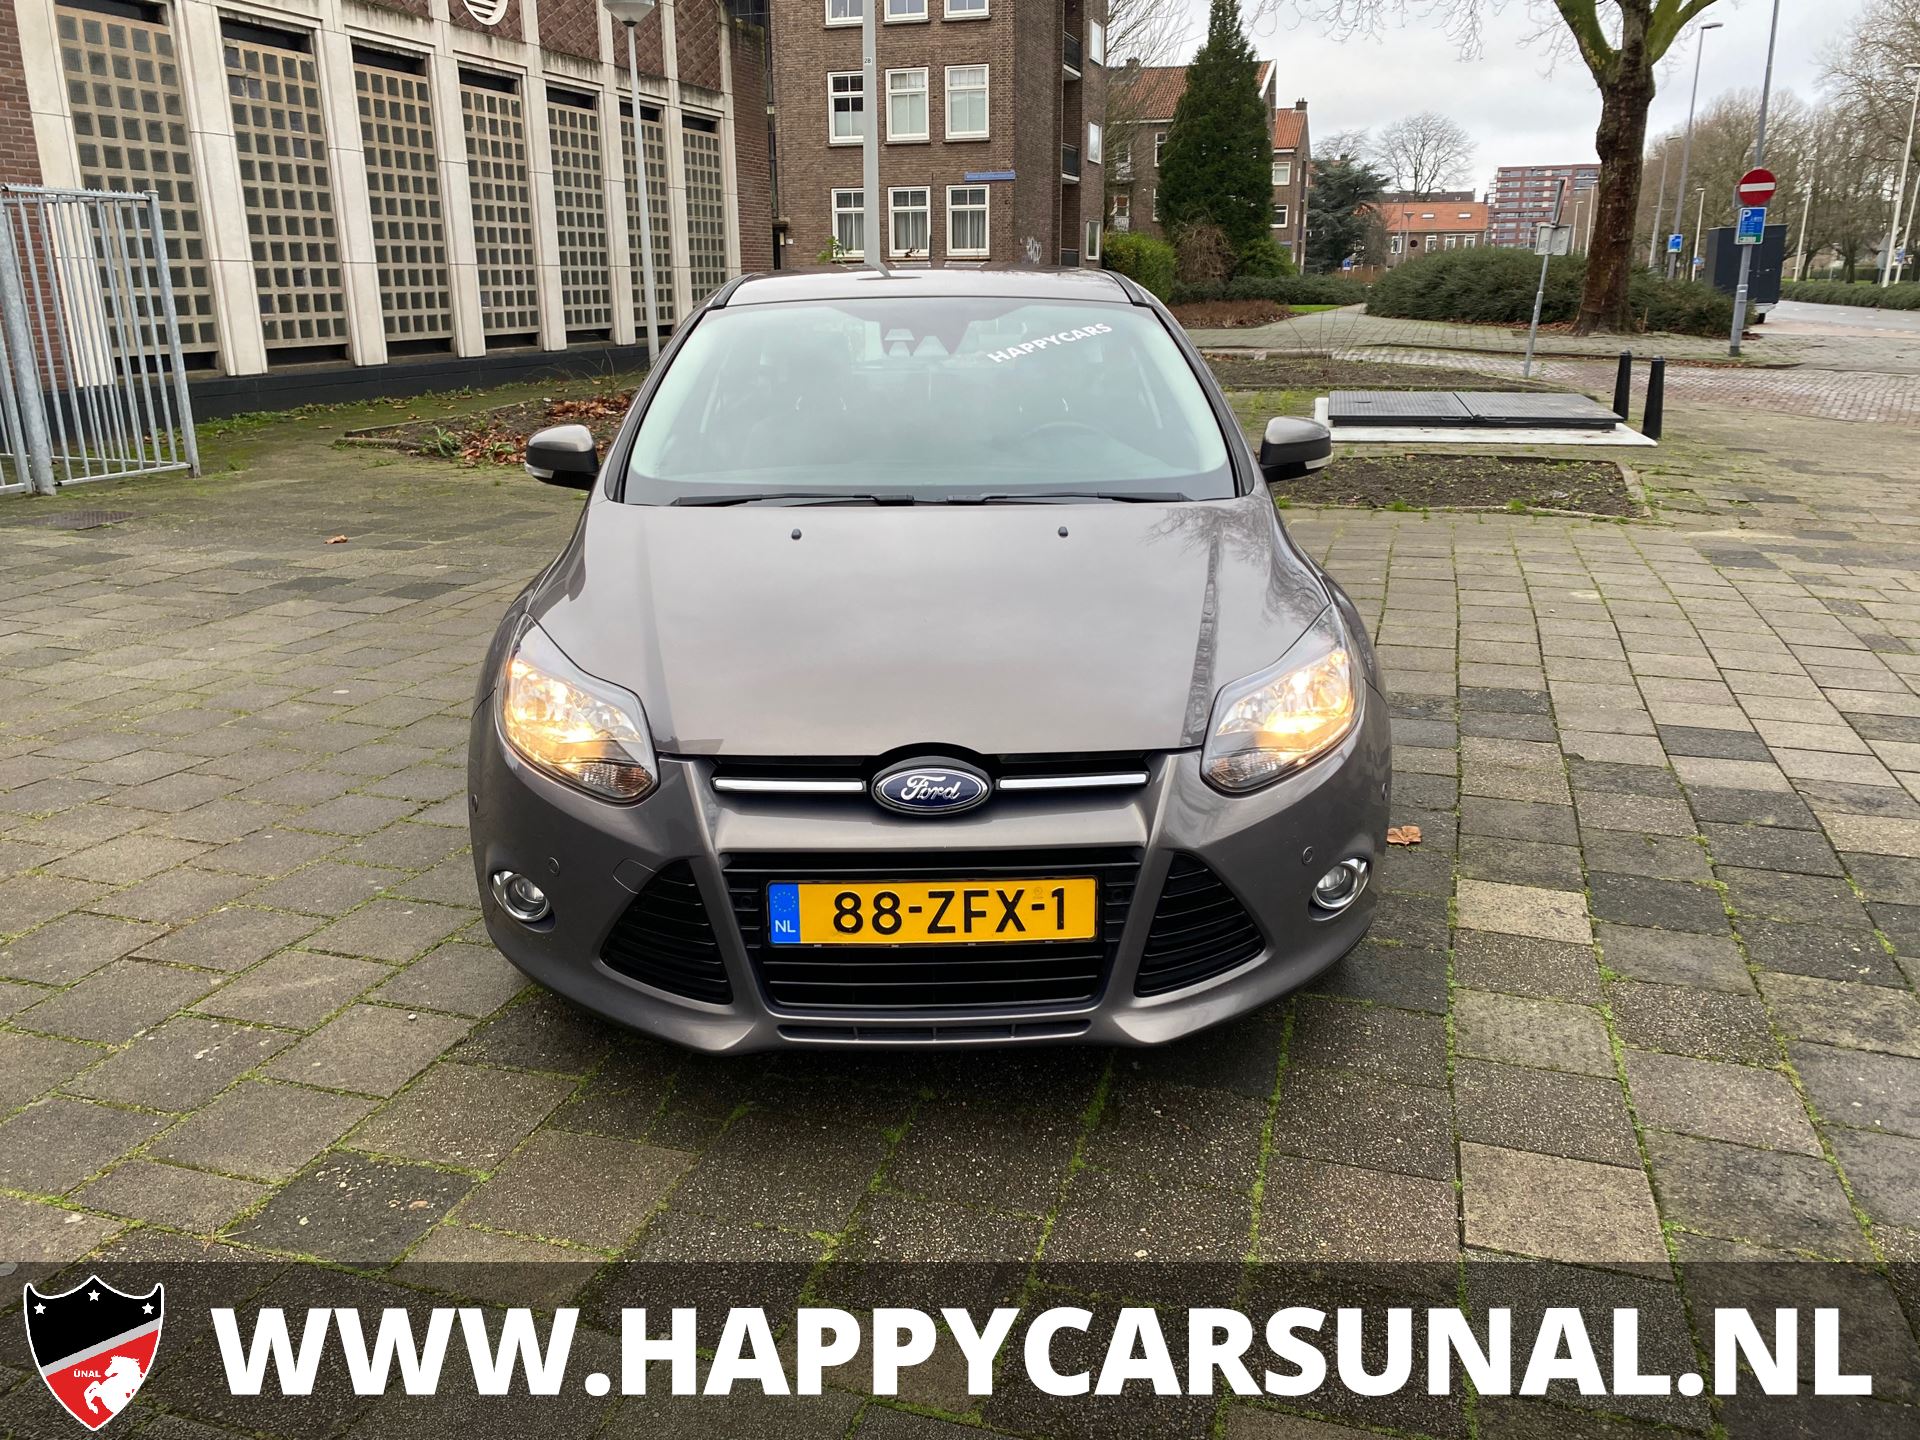 Ford Focus - 1.6 TDCI ECOnetic Lease Titanium |NAP |PDC Diesel uit 2012 - www.happycarsunal.nl